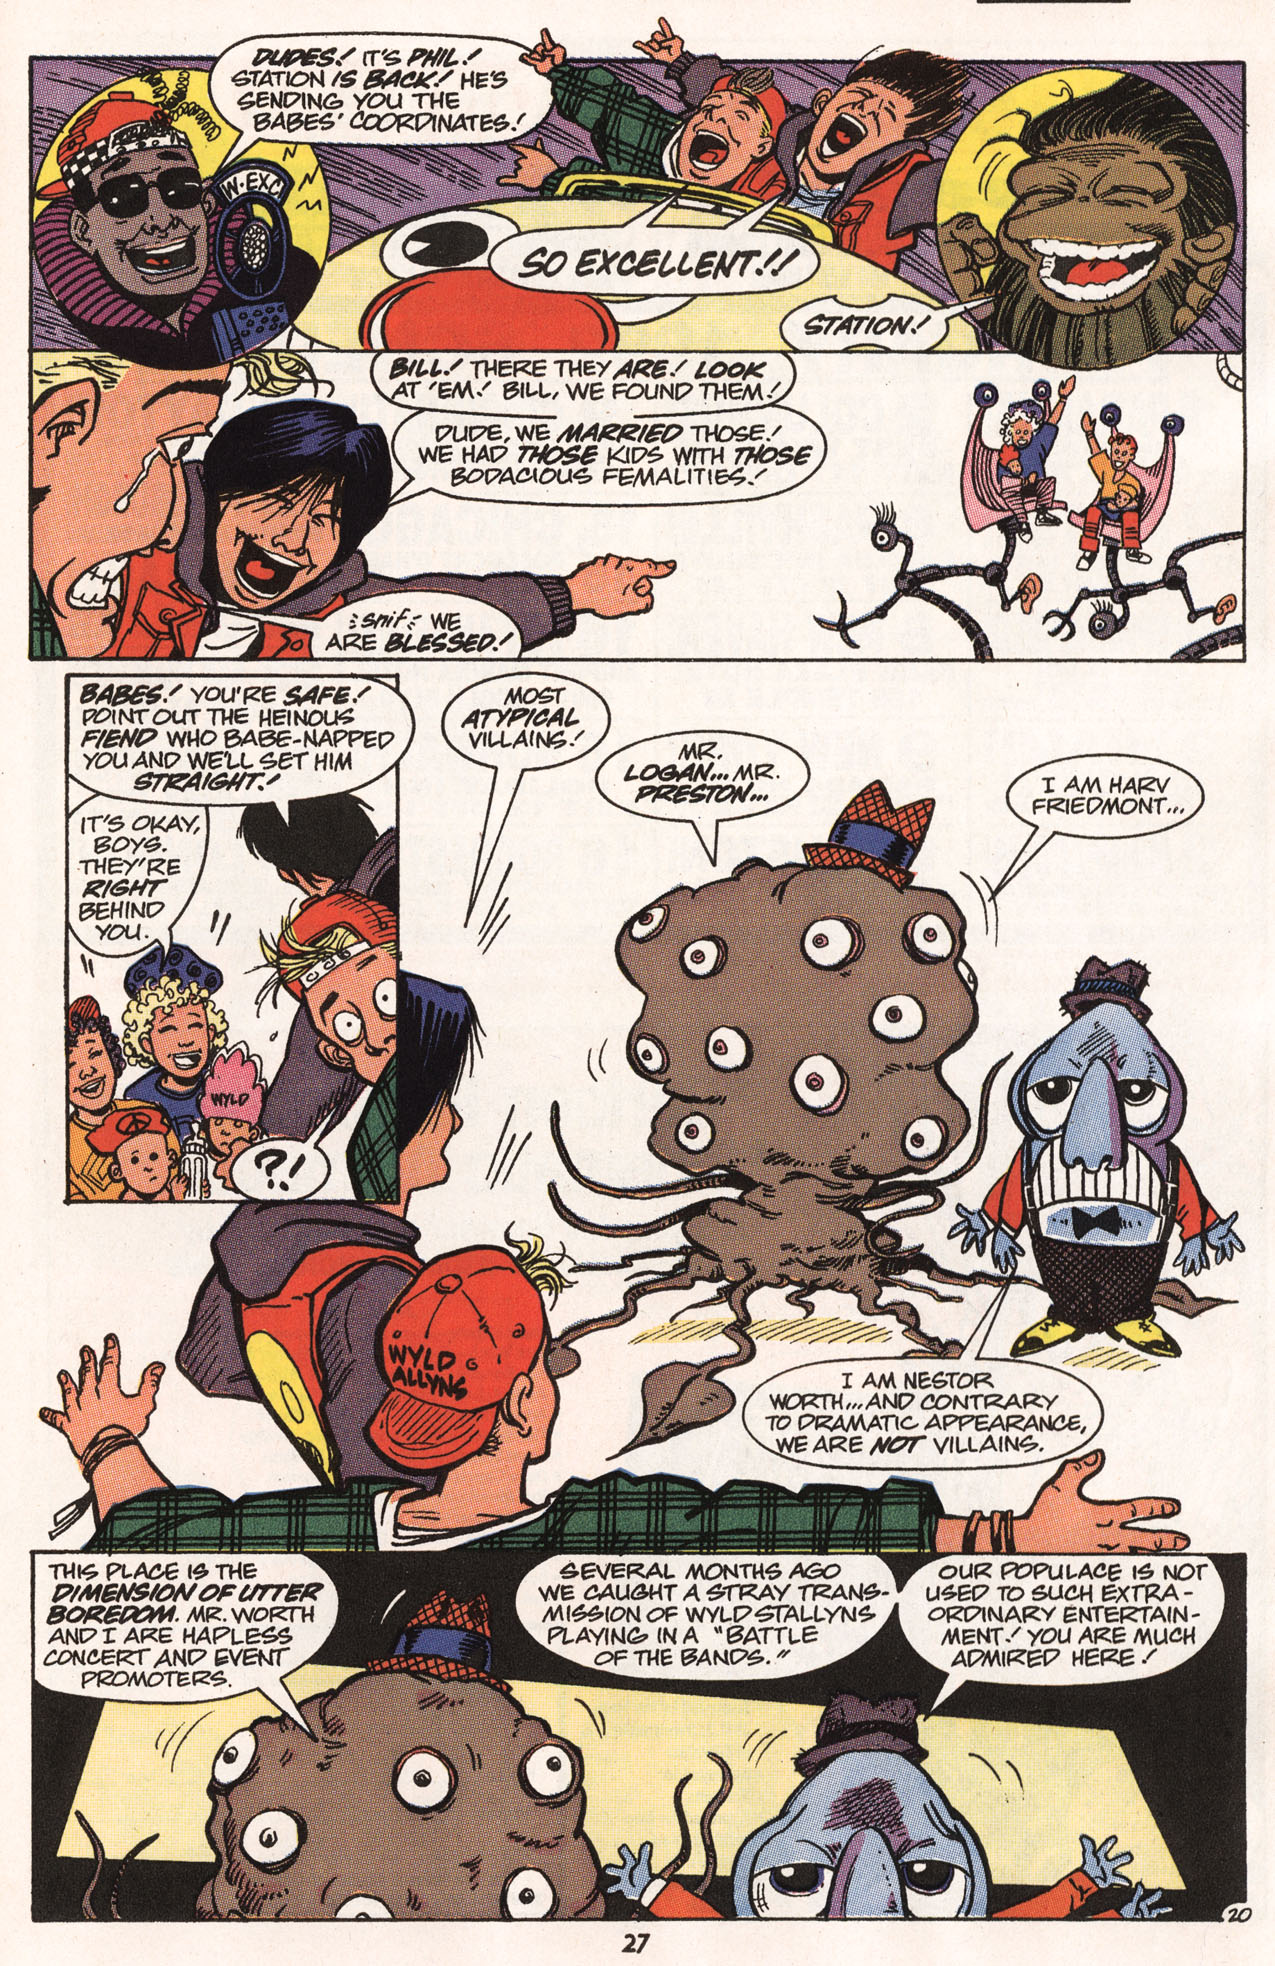 Read online Bill & Ted's Excellent Comic Book comic -  Issue #4 - 27